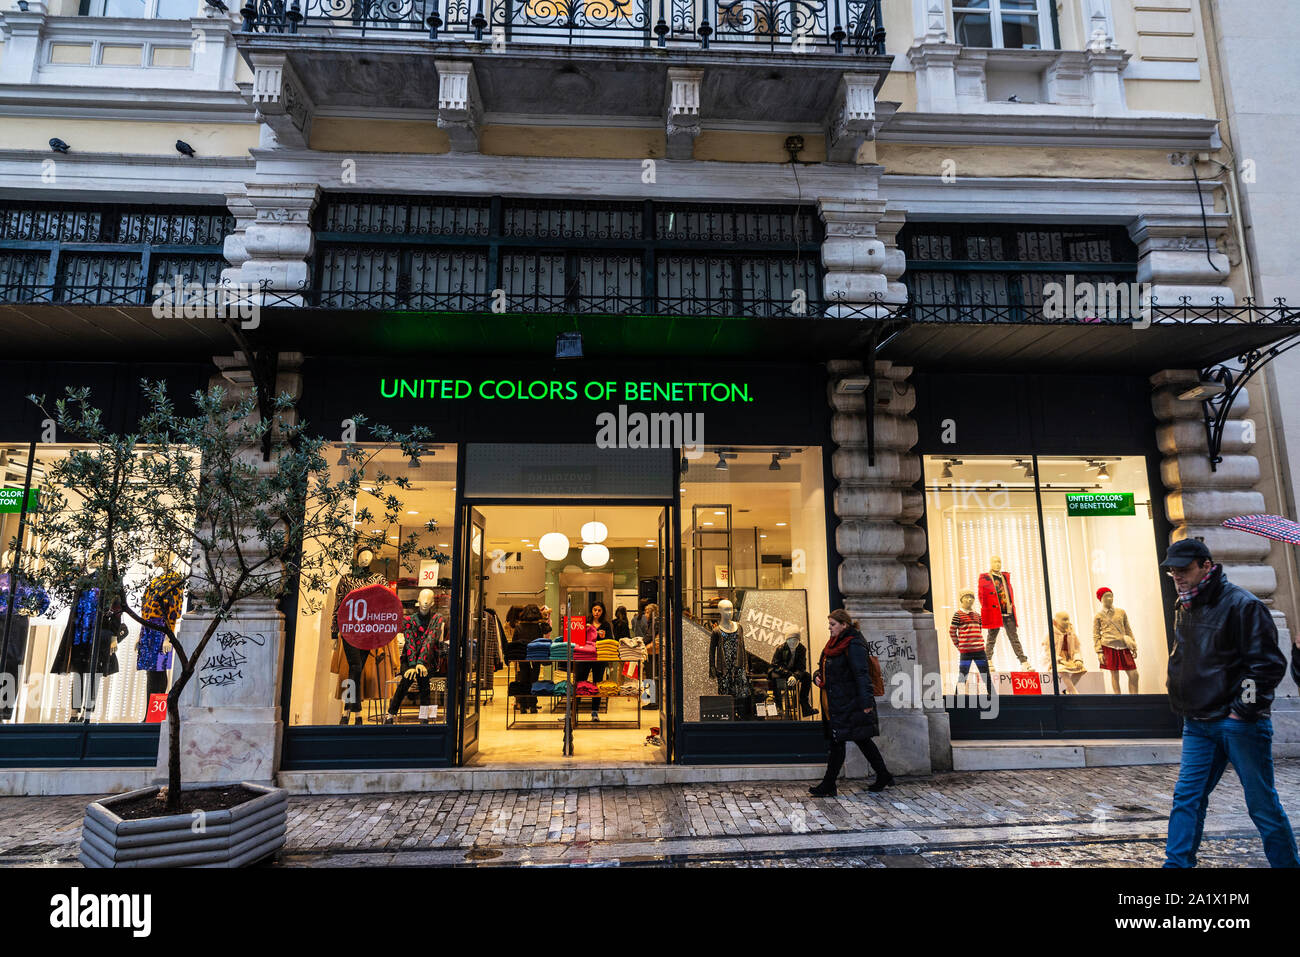 Athens, Greece - January 4, 2019: Display of a United Colors of Benetton store at night with people around in Athens, Greece Stock Photo